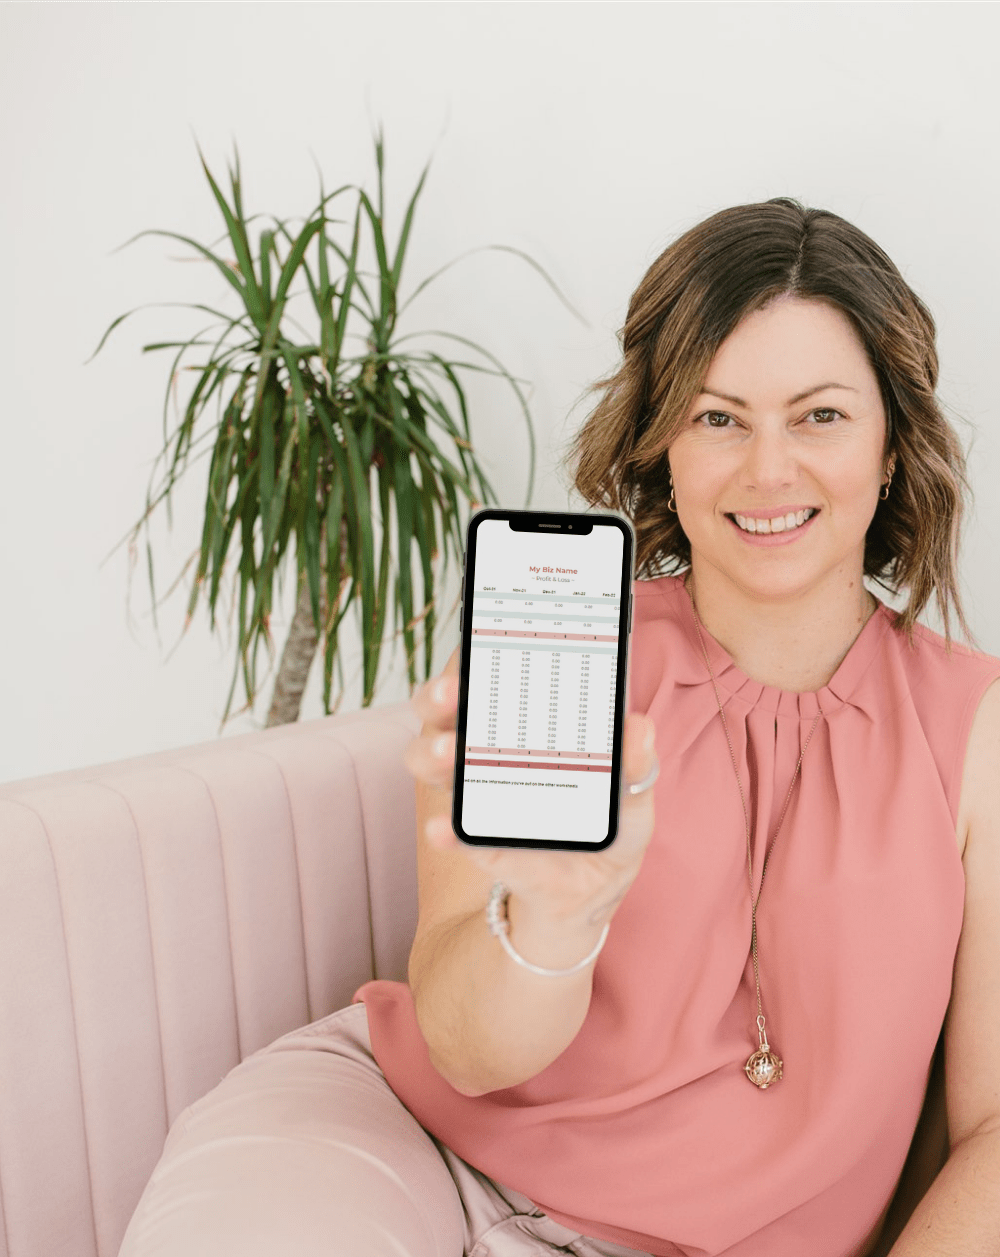 Lisa Turner, a Bookkeeper from Accounted For You, sitting on a pink couch smiling and holding a phone containing an image of free bookkeeping resources.